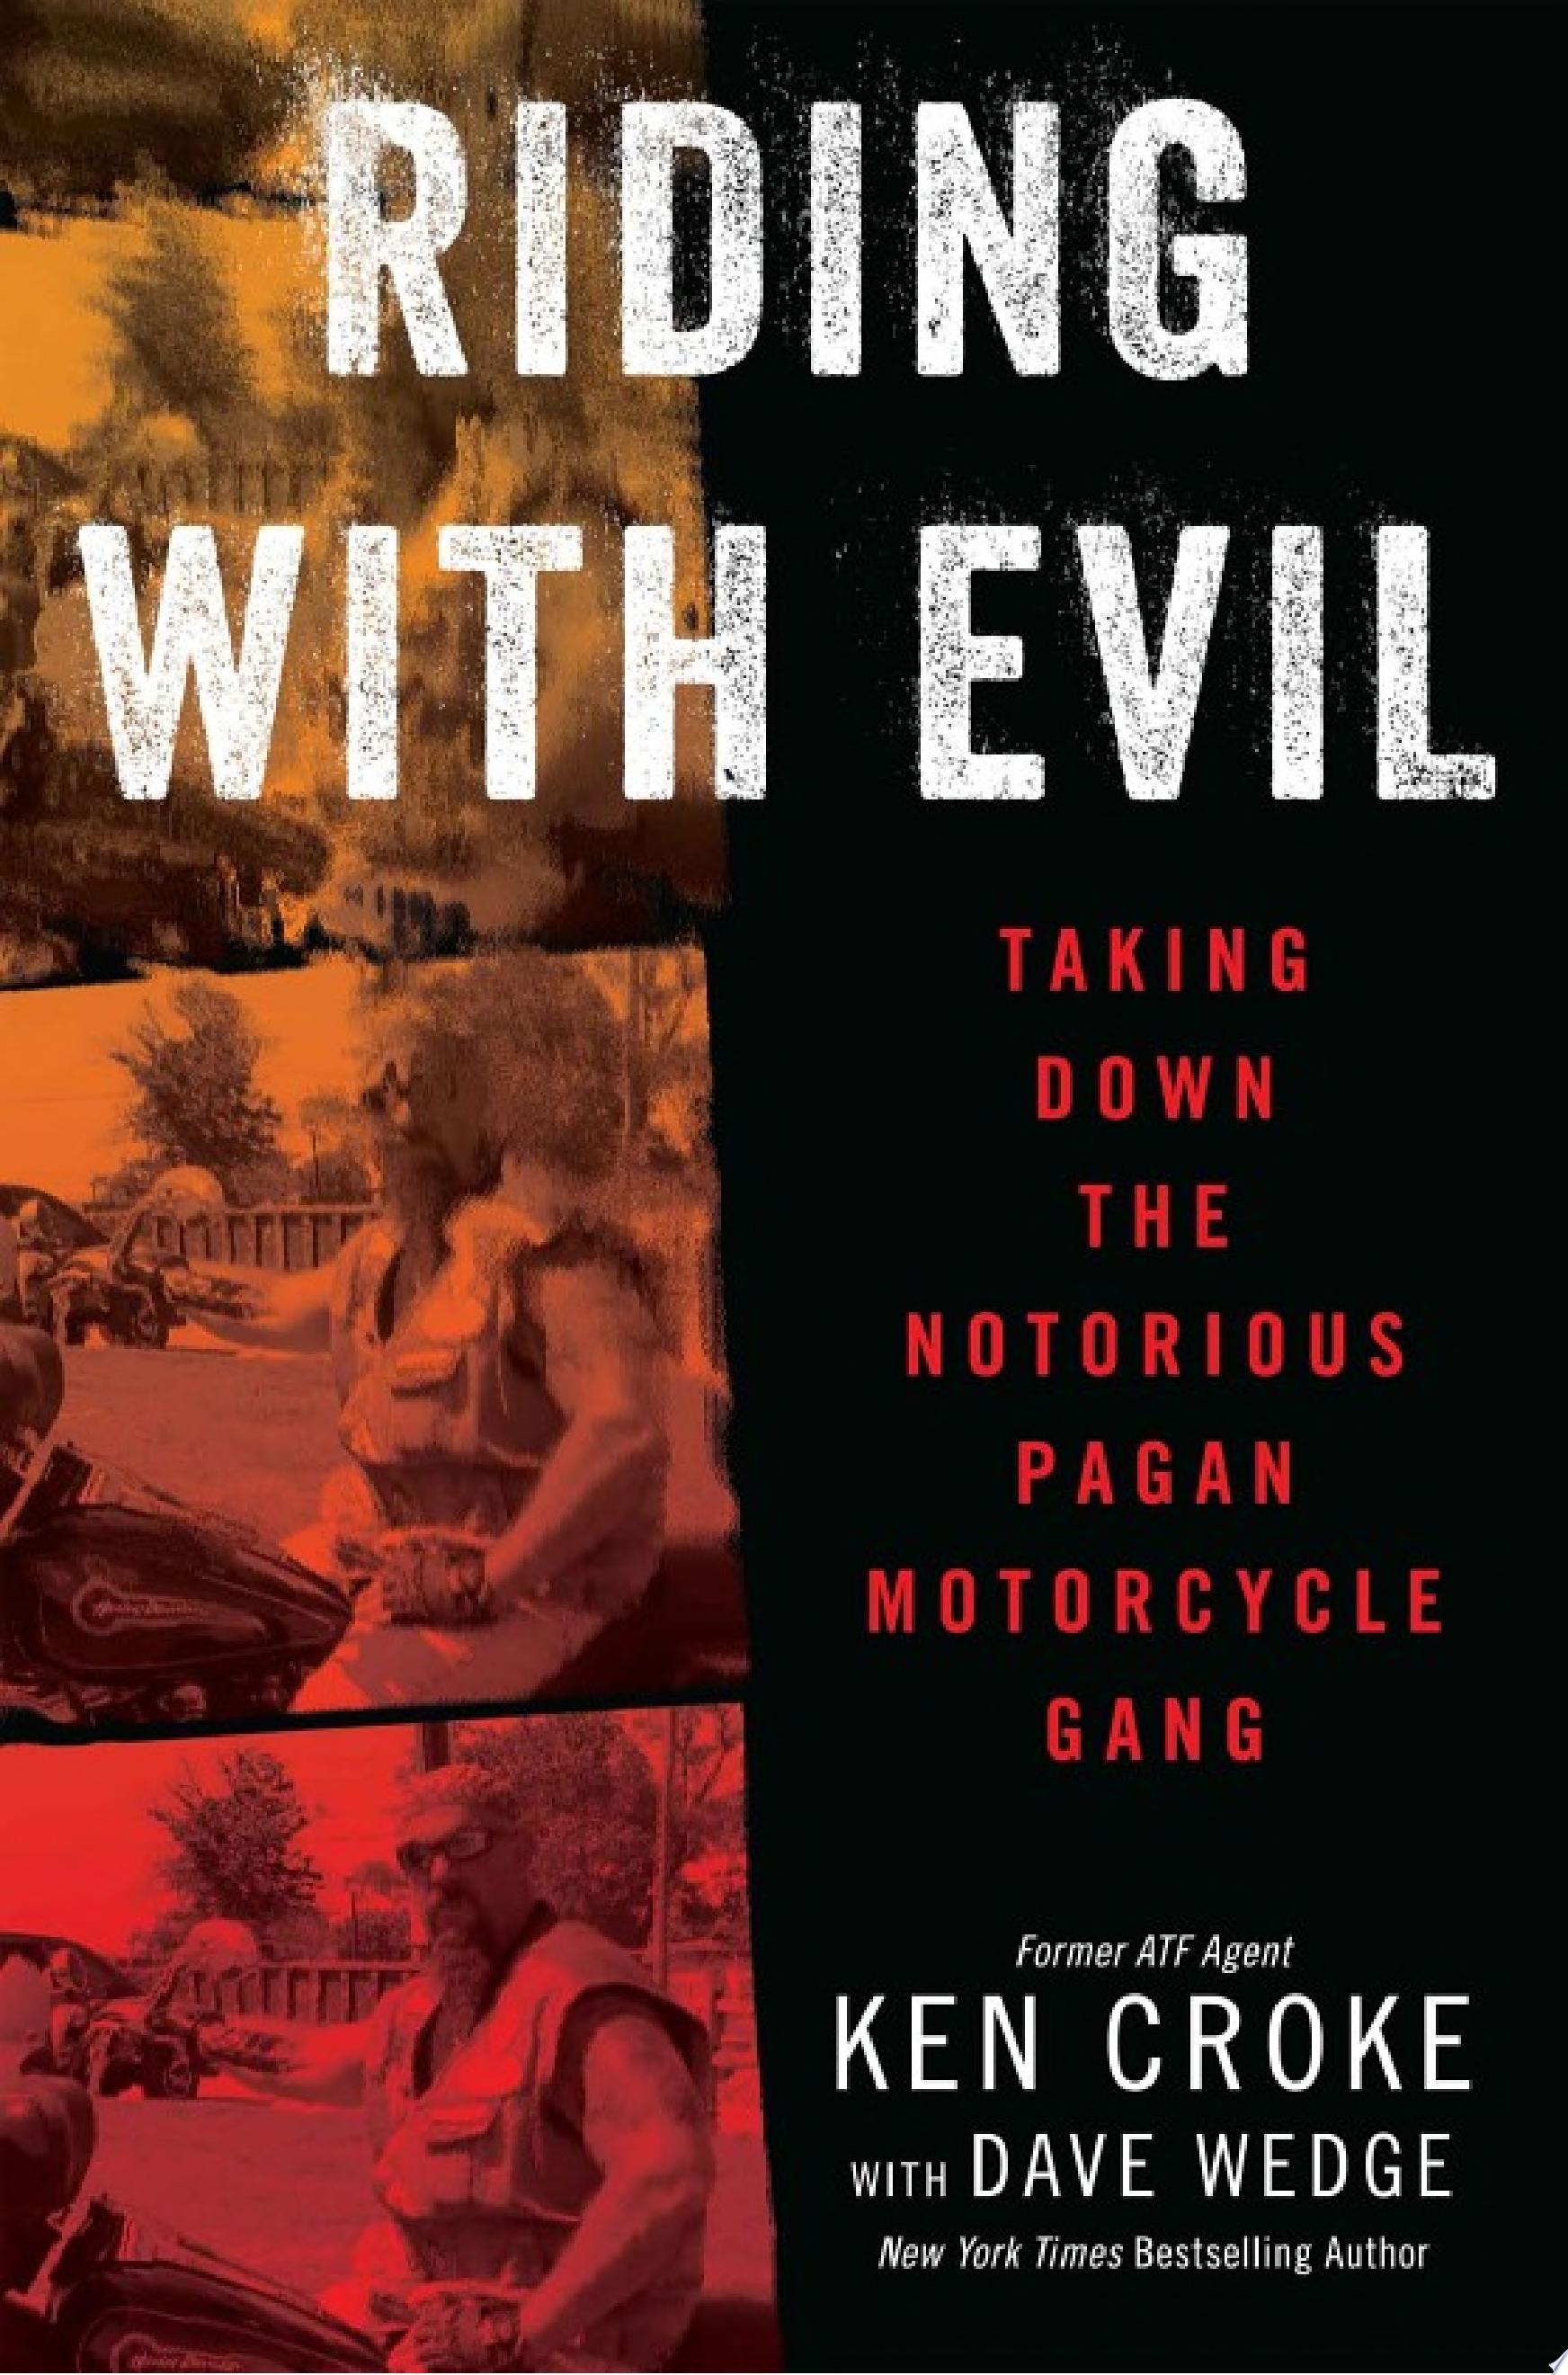 Image for "Riding with Evil"